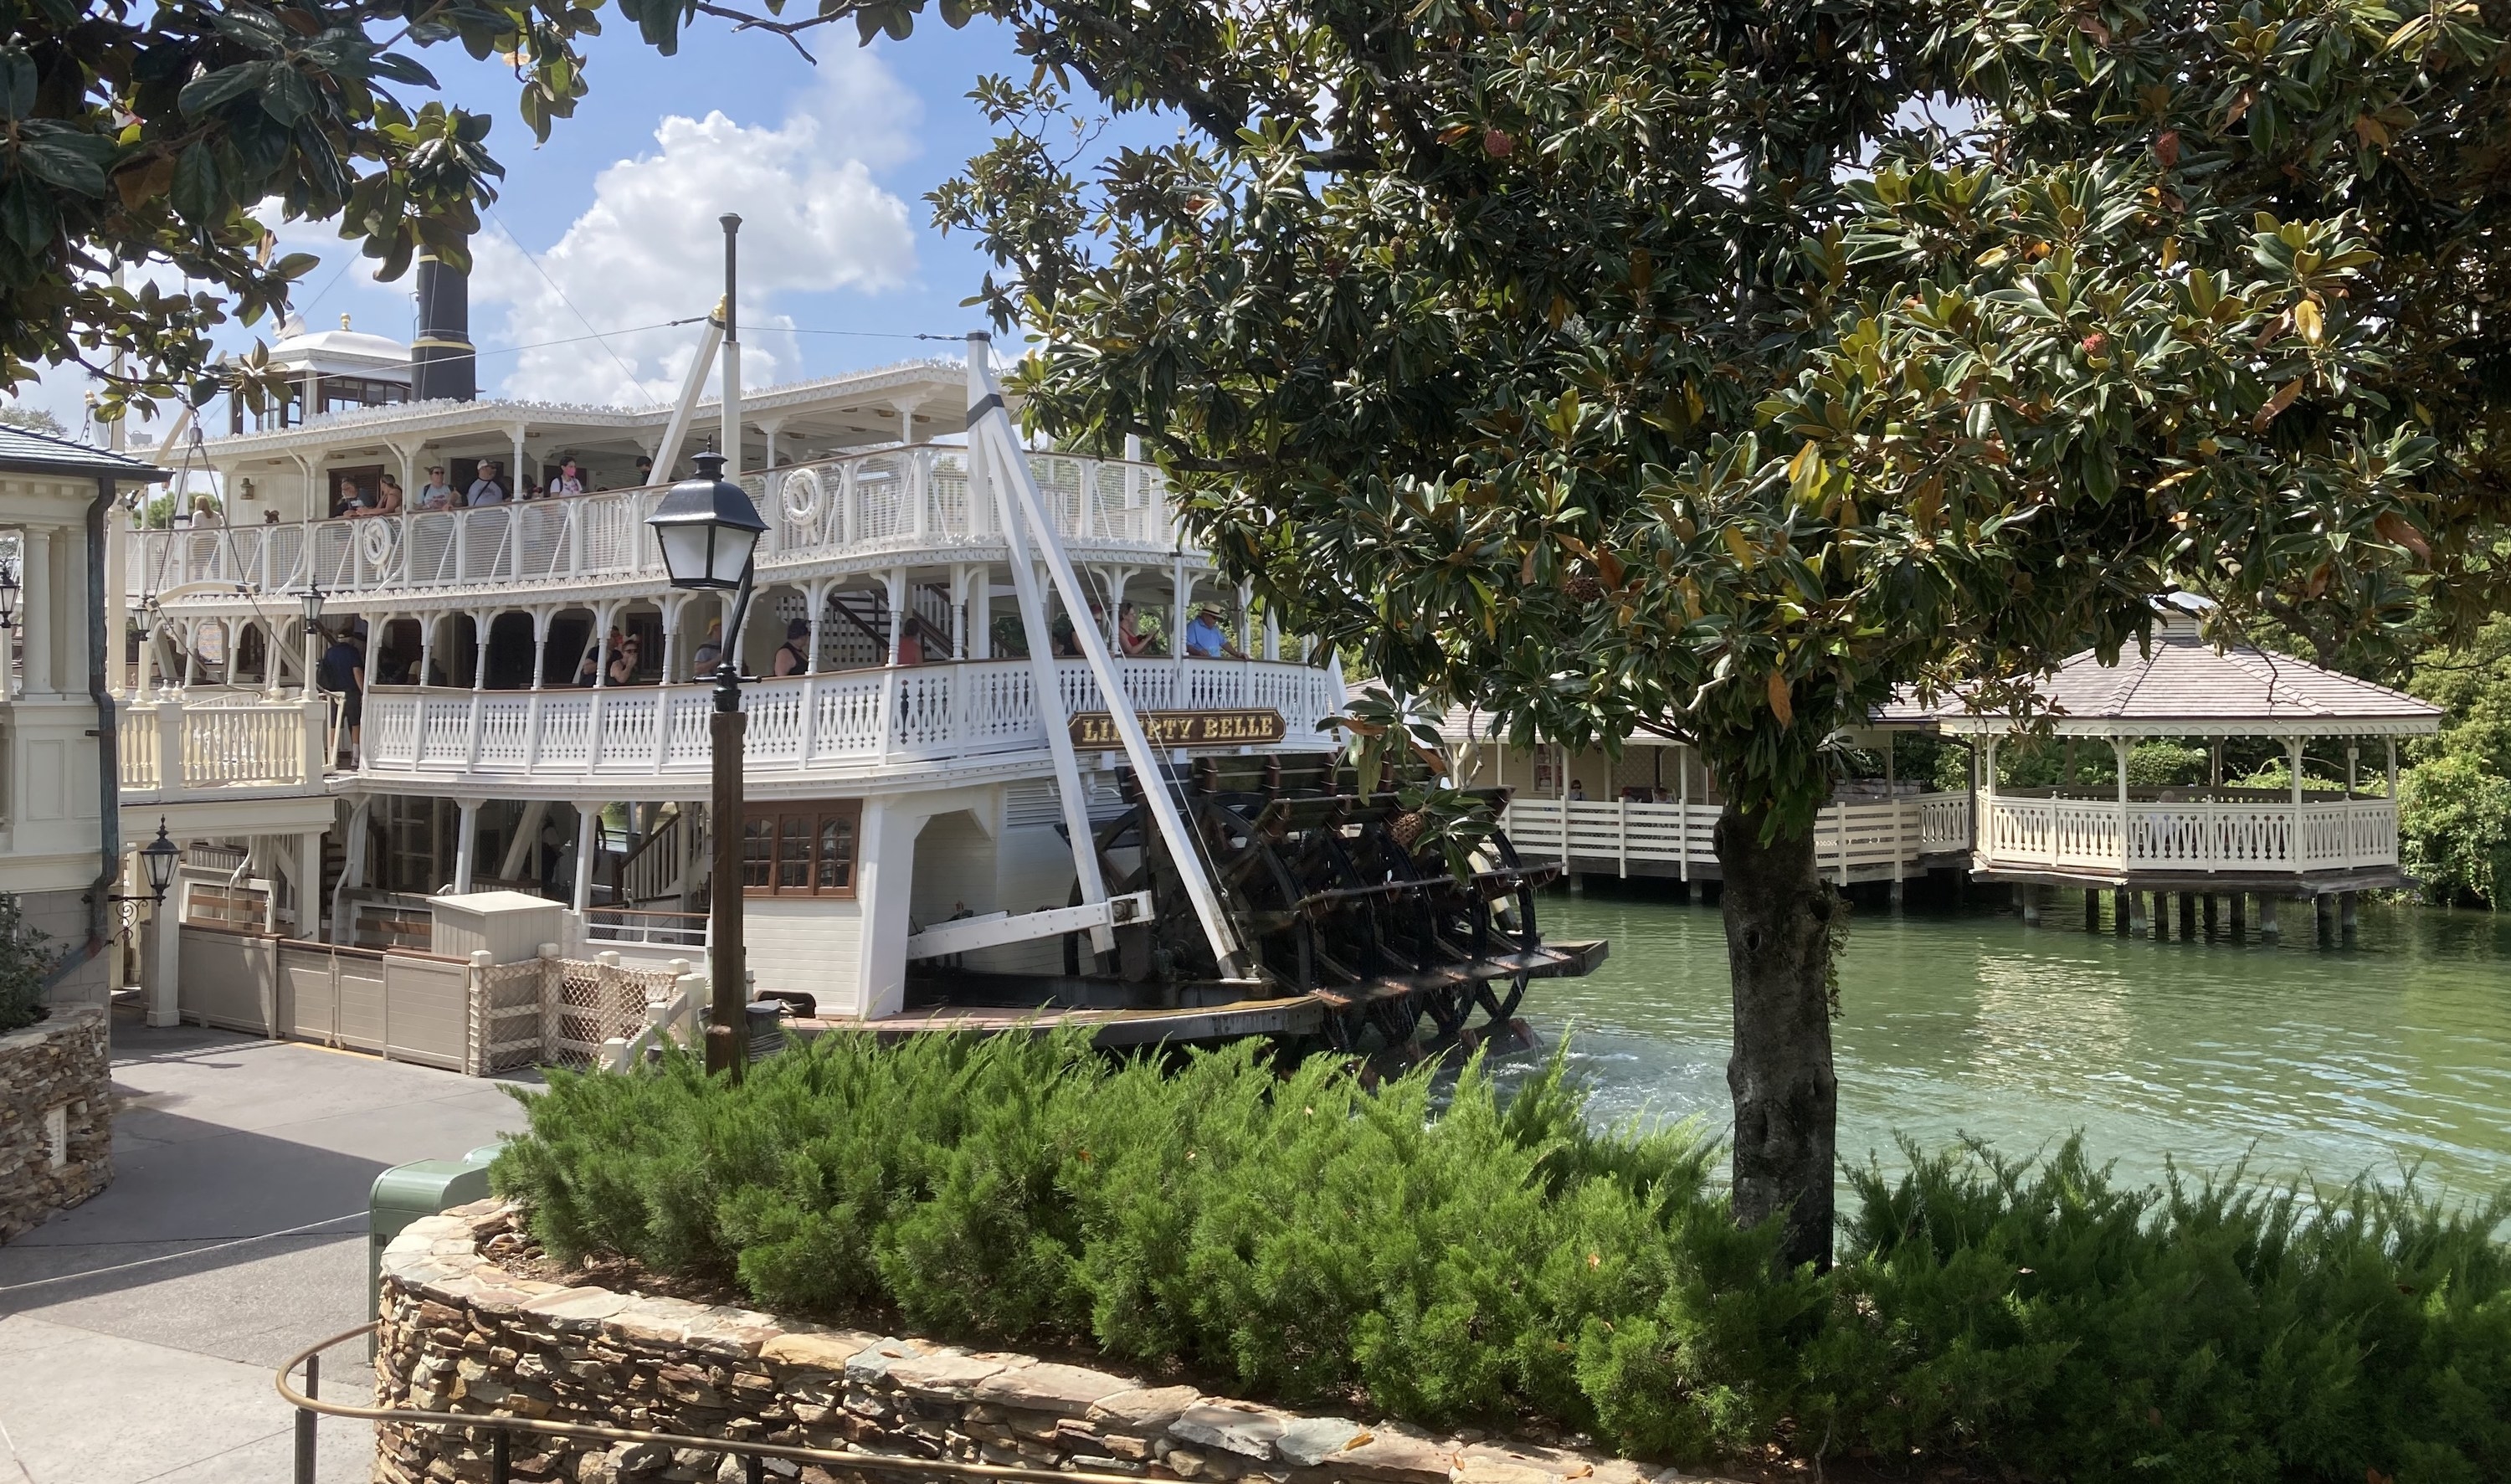 The Liberty Belle docked in front of Tom Sawyer Island